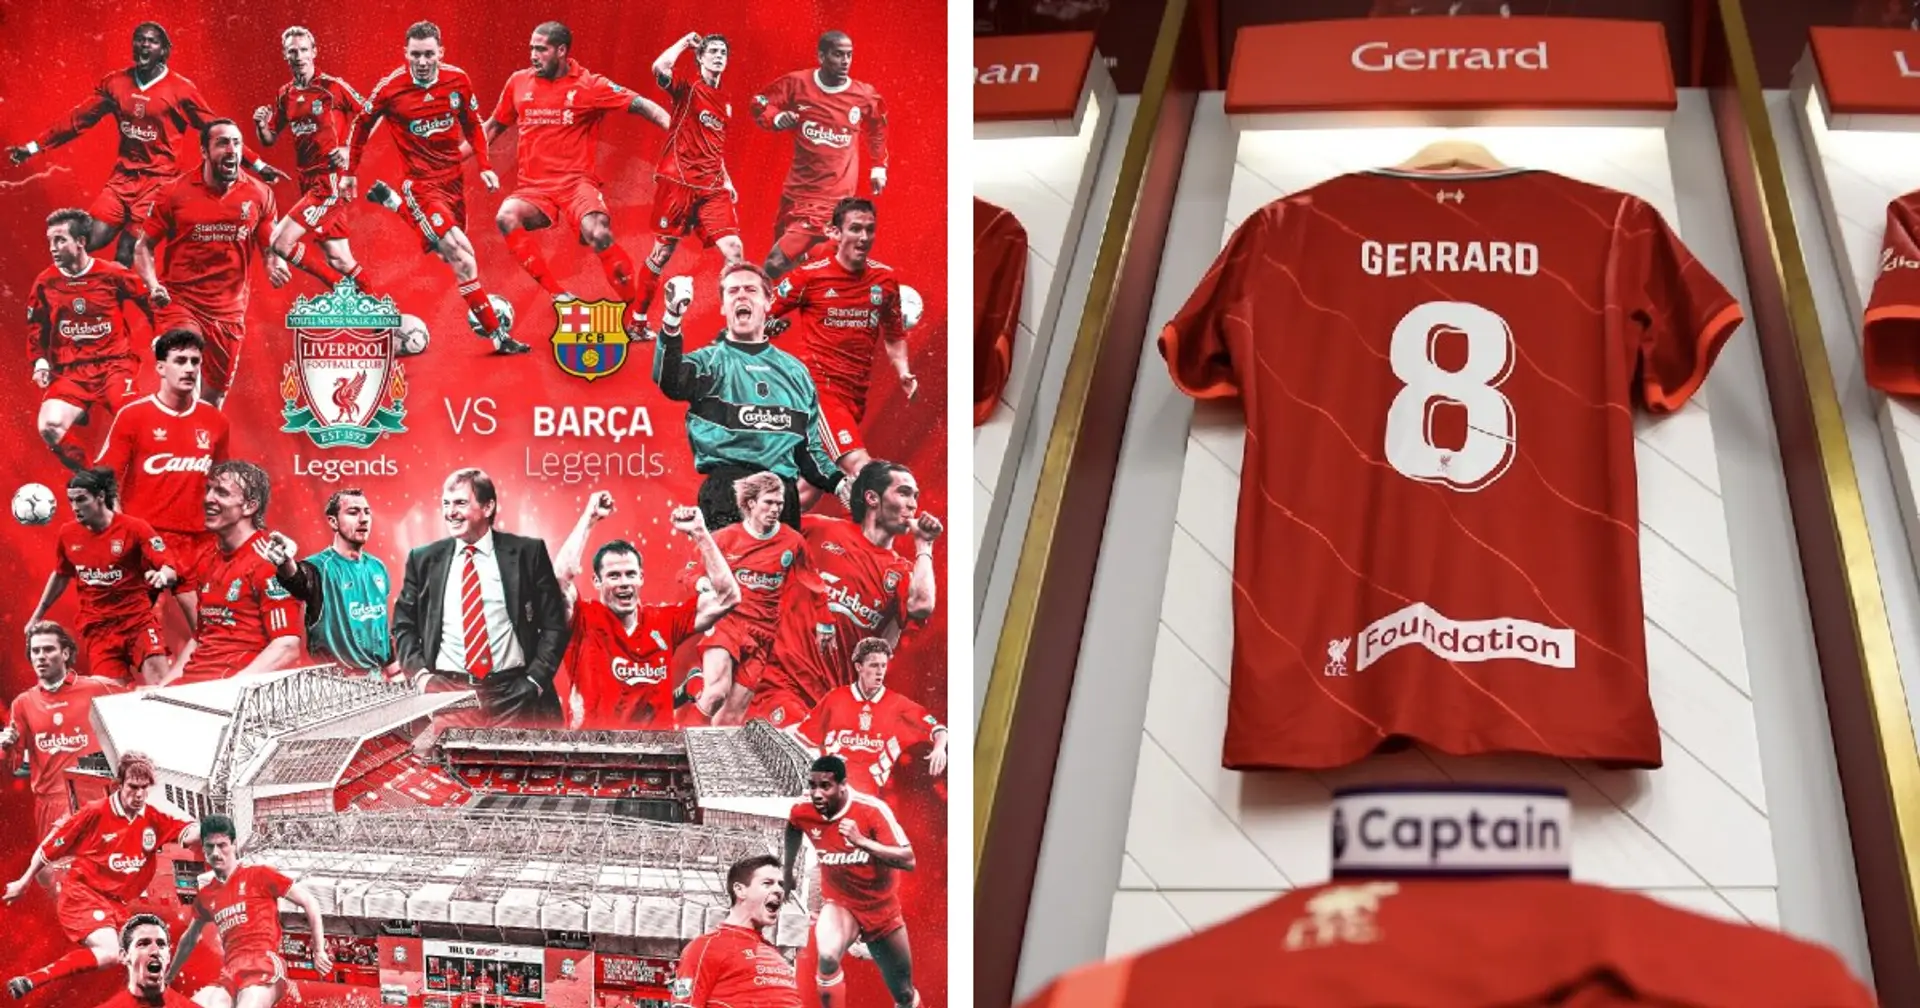 Gerrard captains Liverpool once again as starting XI for legends game vs Barcelona revealed 